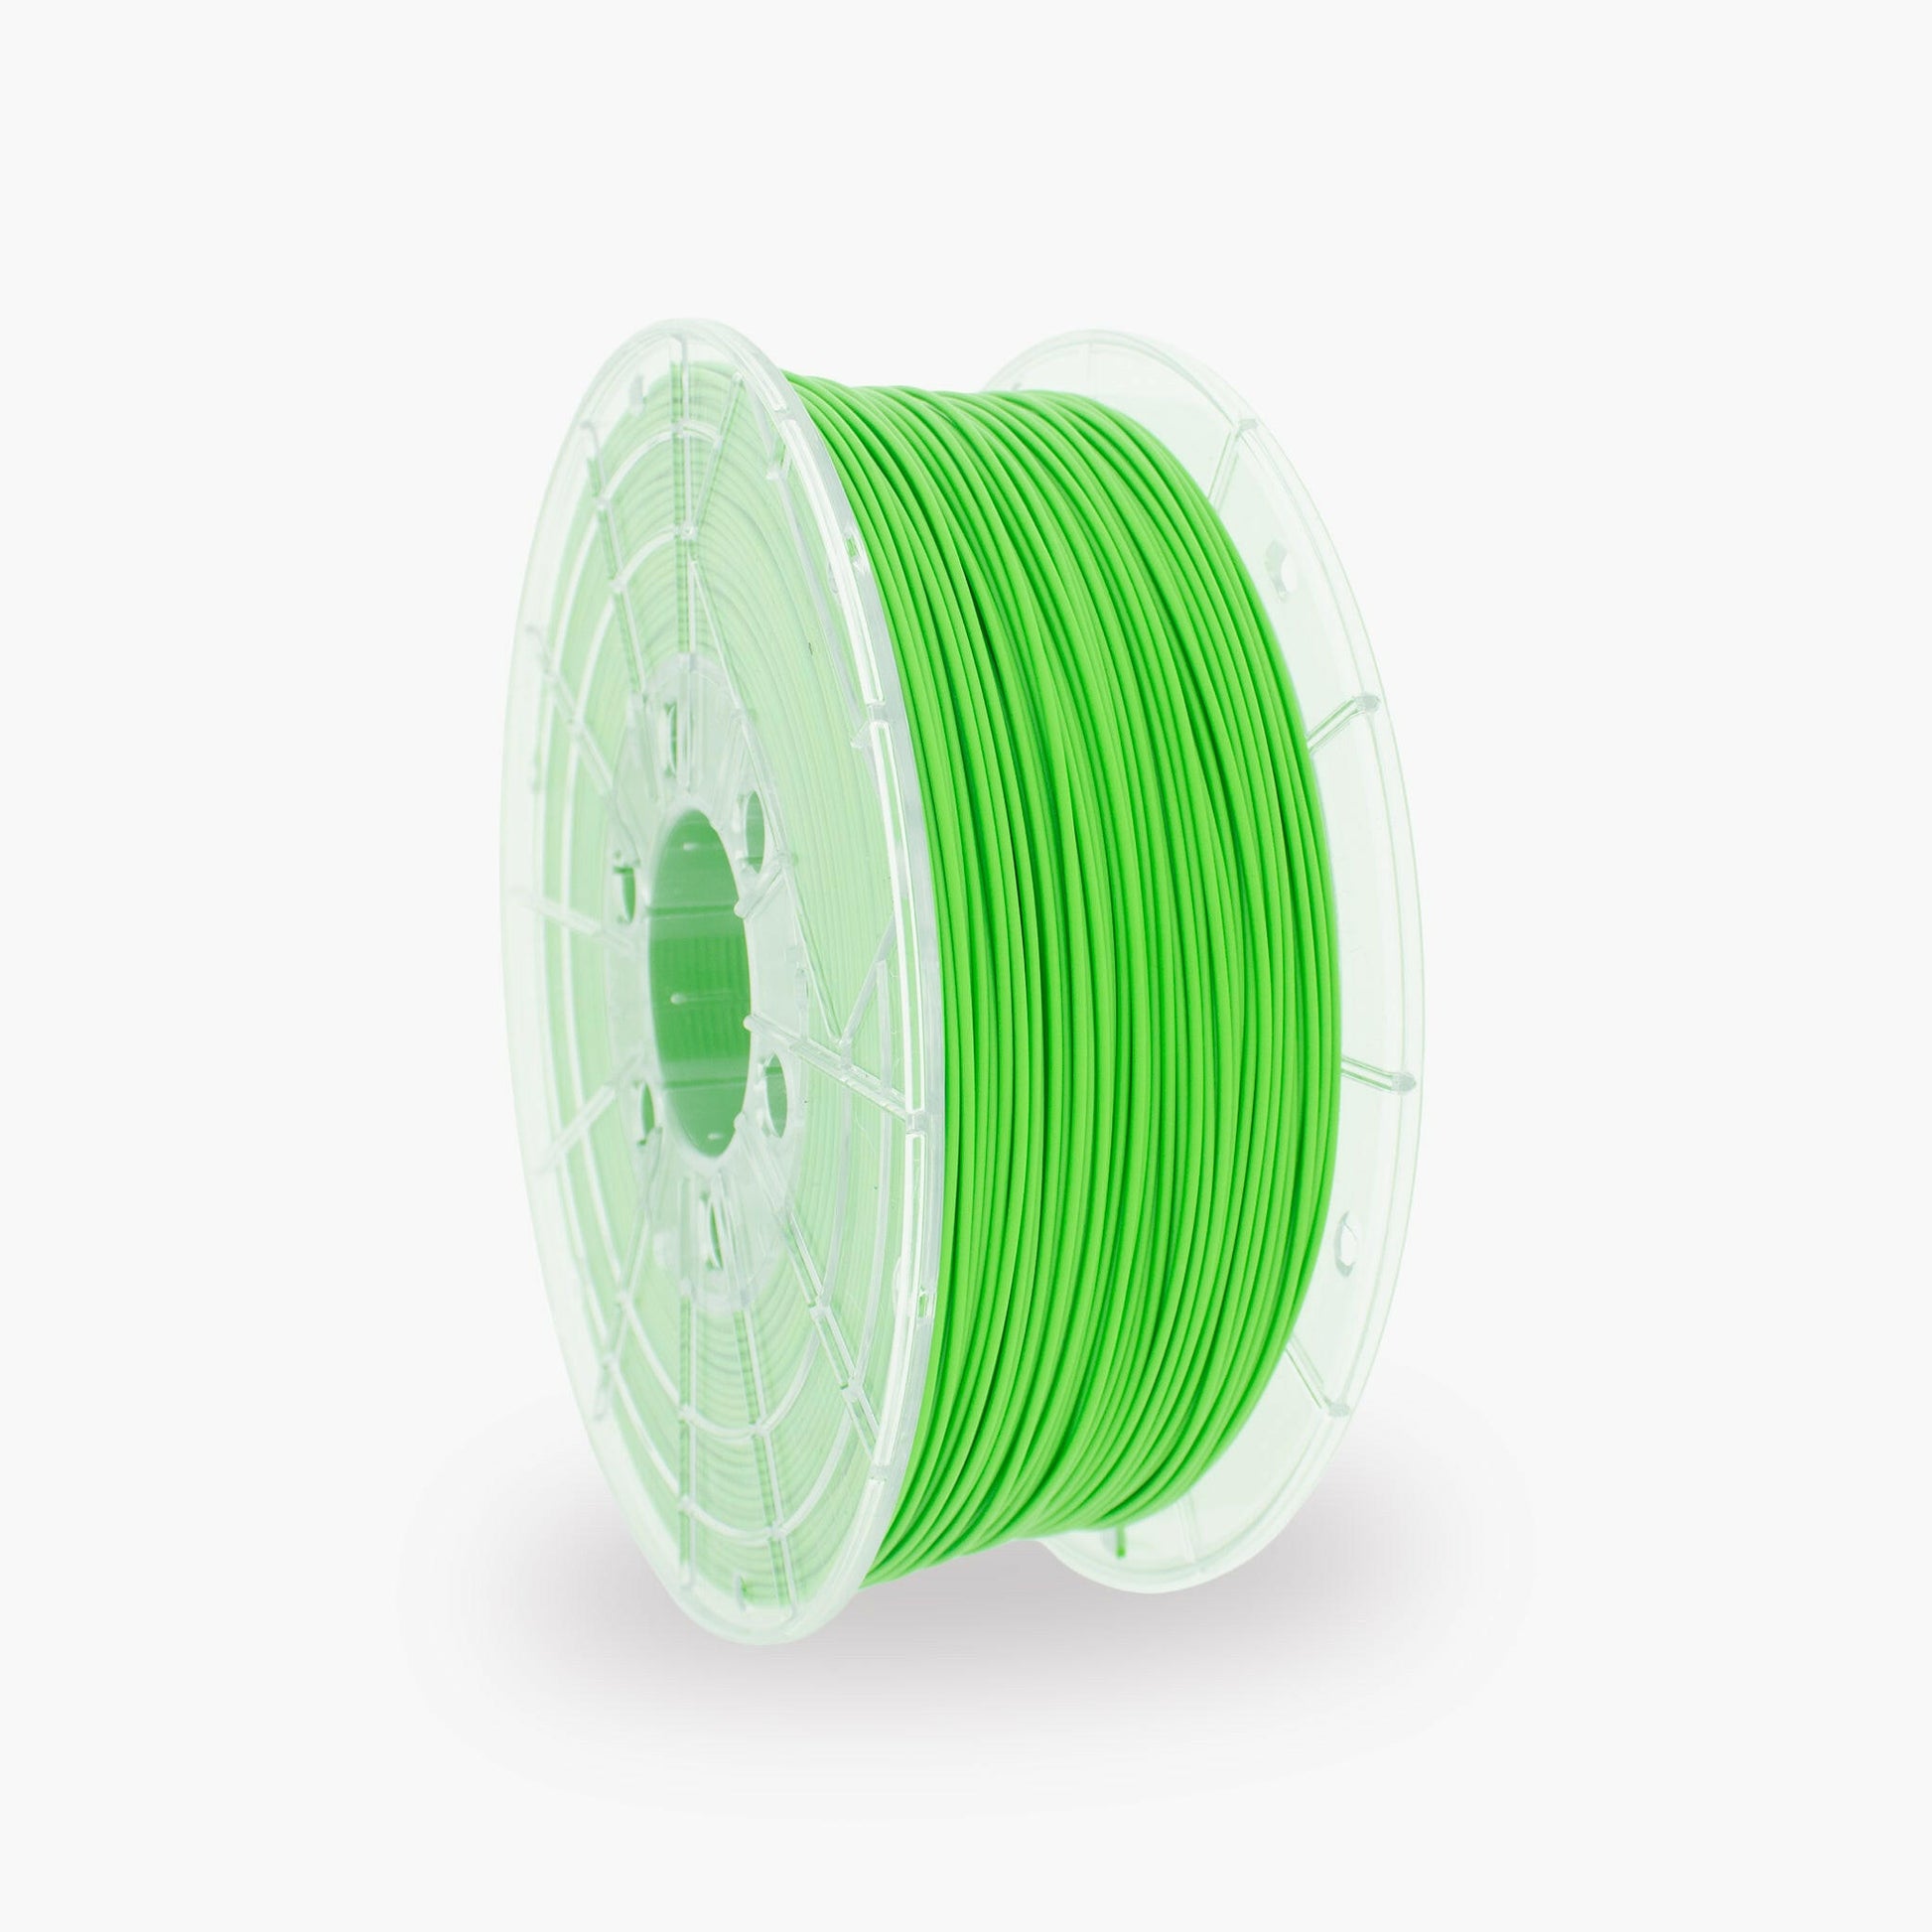 Apple Green PETG 3D Printer Filament with a diameter of 1.75mm on a 1KG Spool.